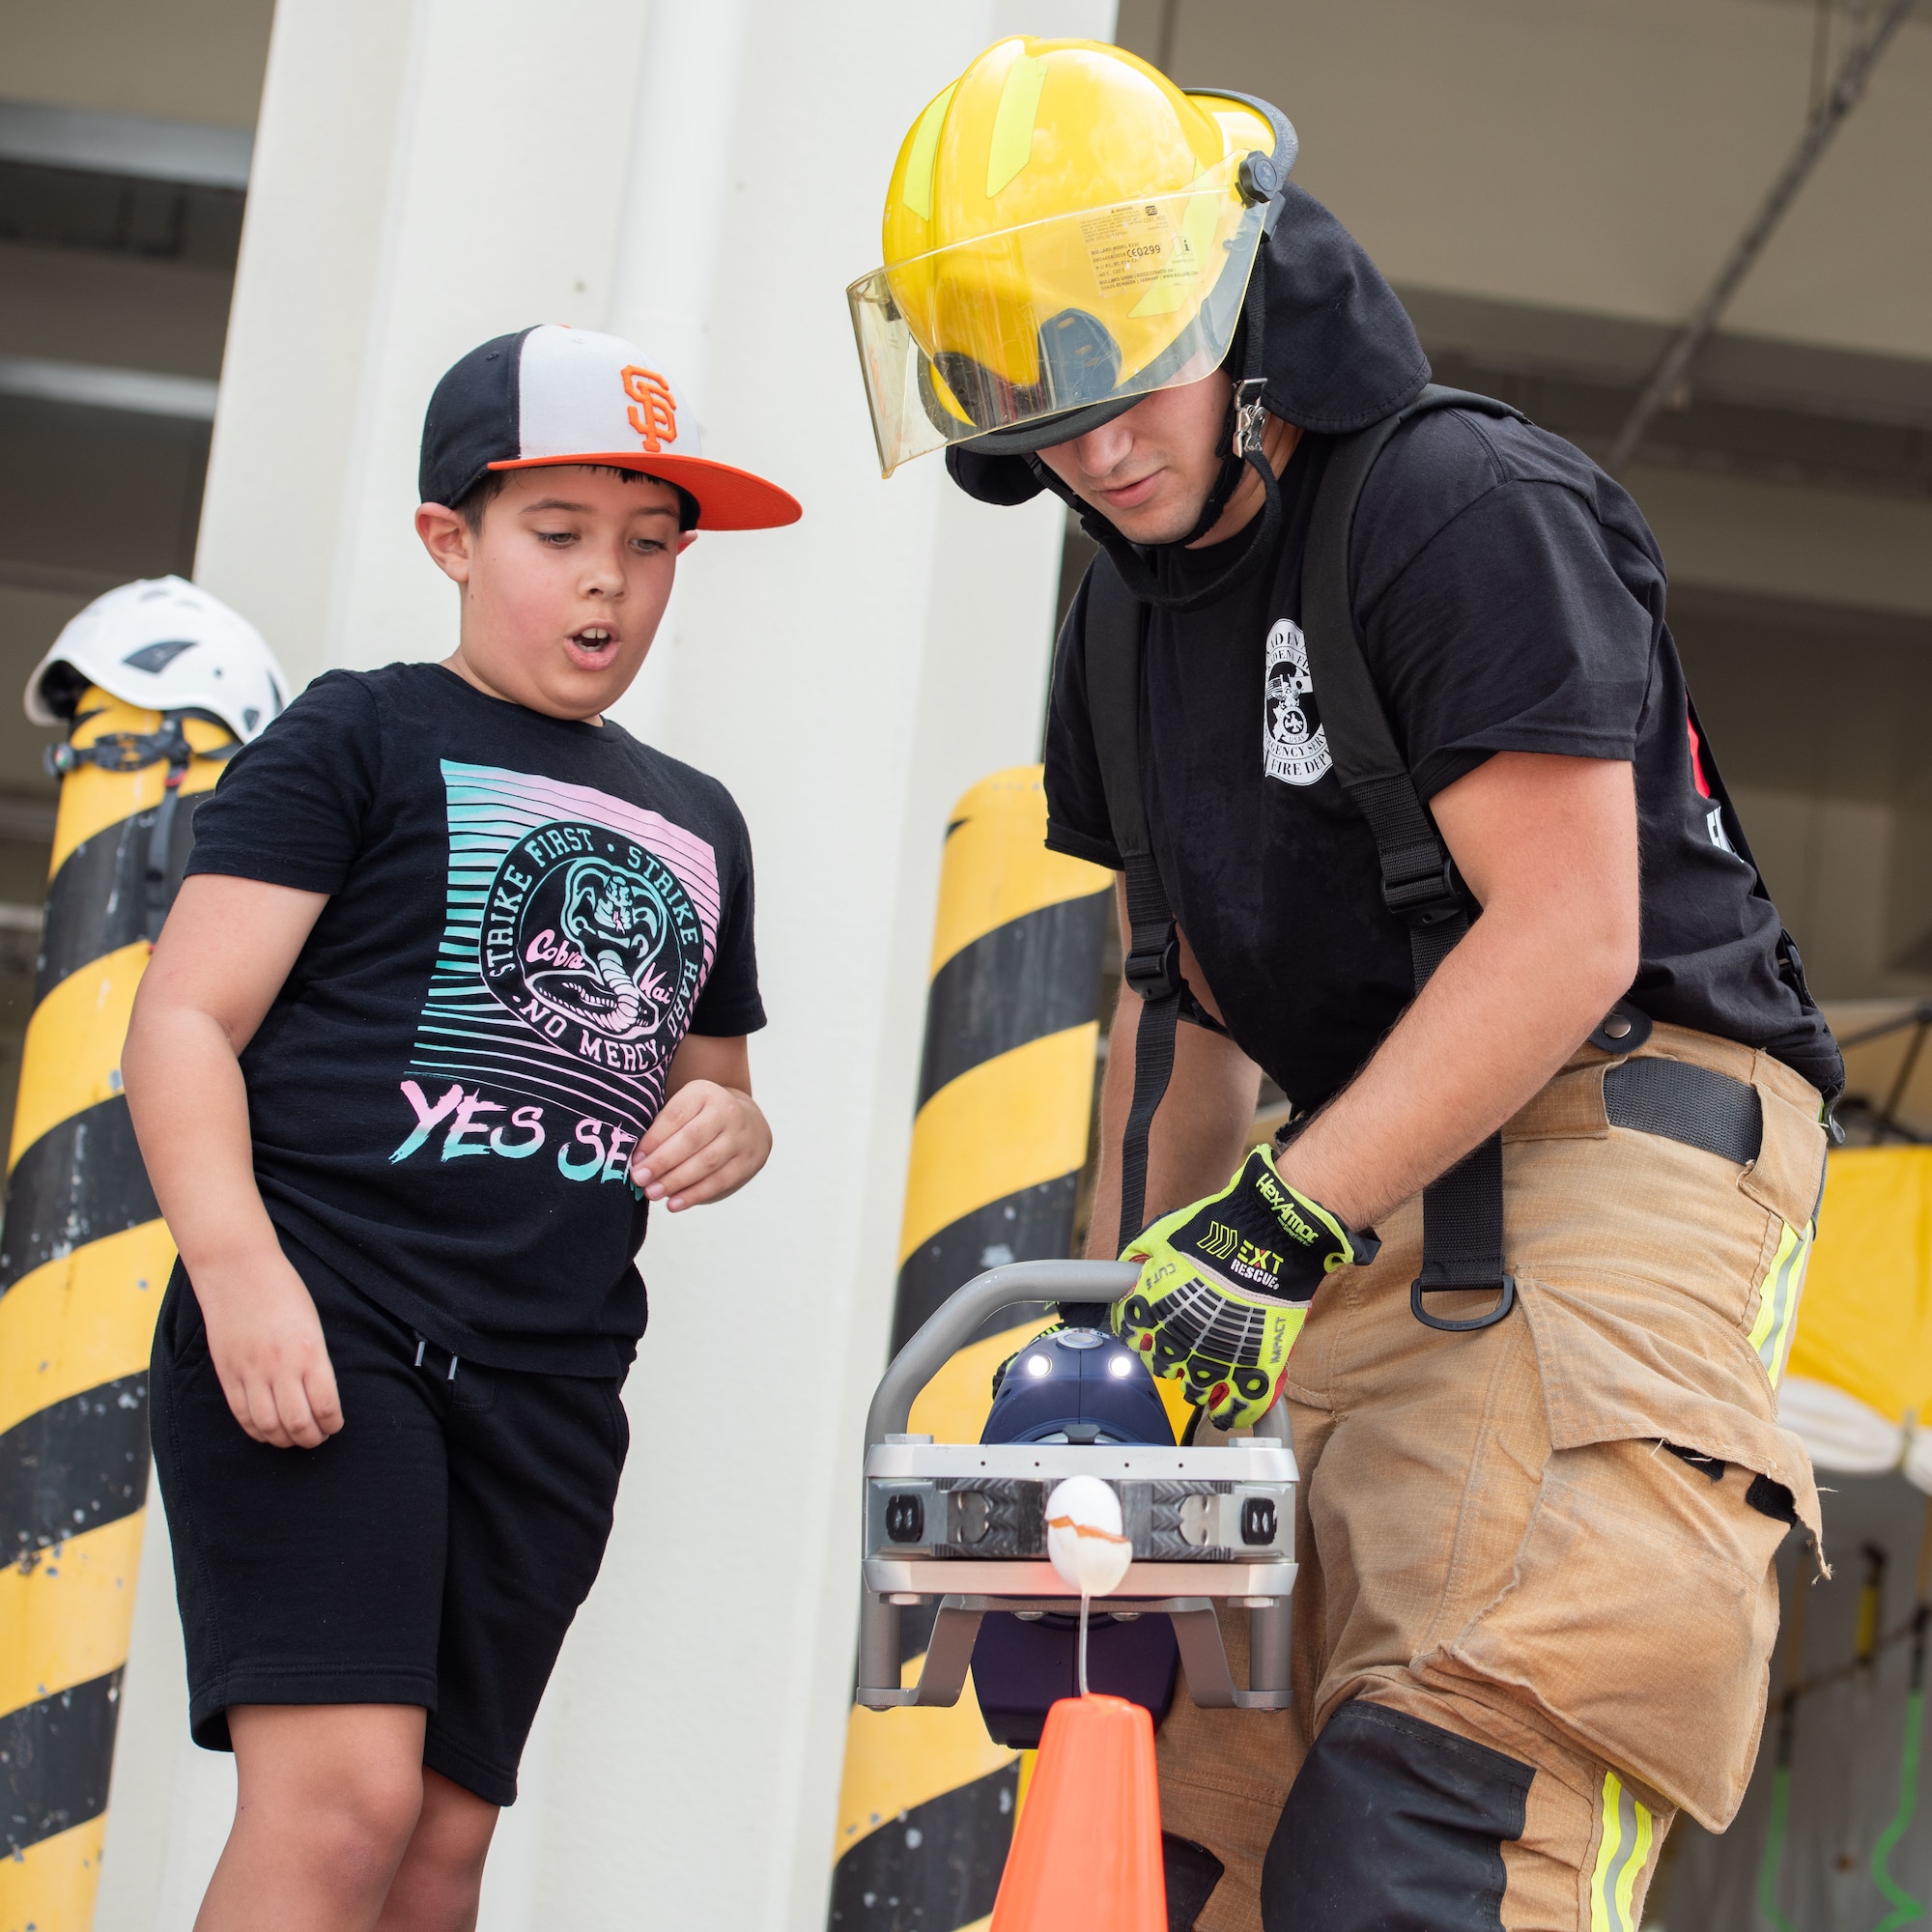 Firefighter demonstrates a fire hose to a child